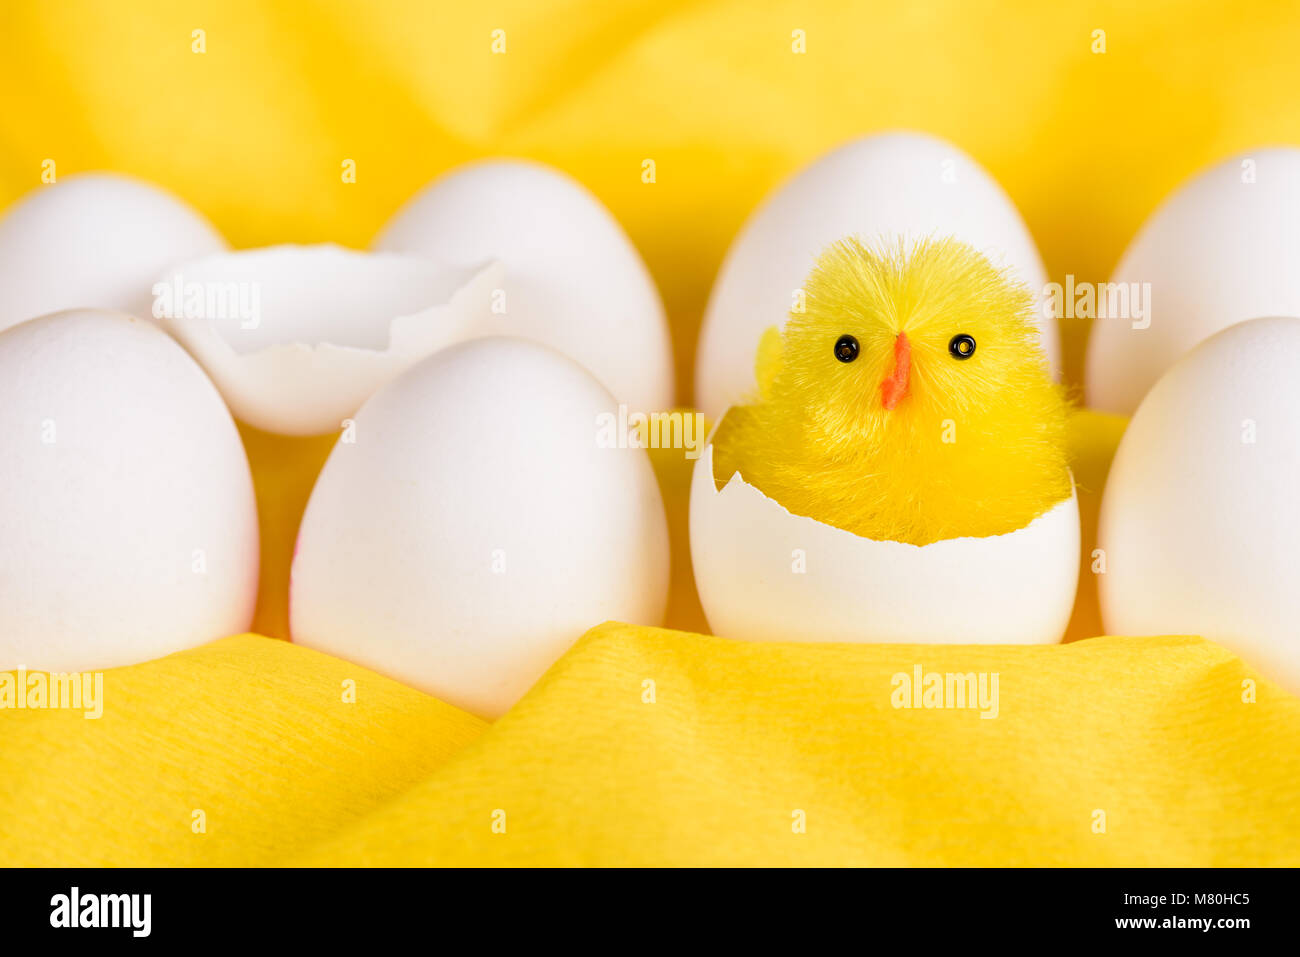 A cute little yellow easter chicken hatched out of a white egg among other white eggs against a yellow background. Stock Photo